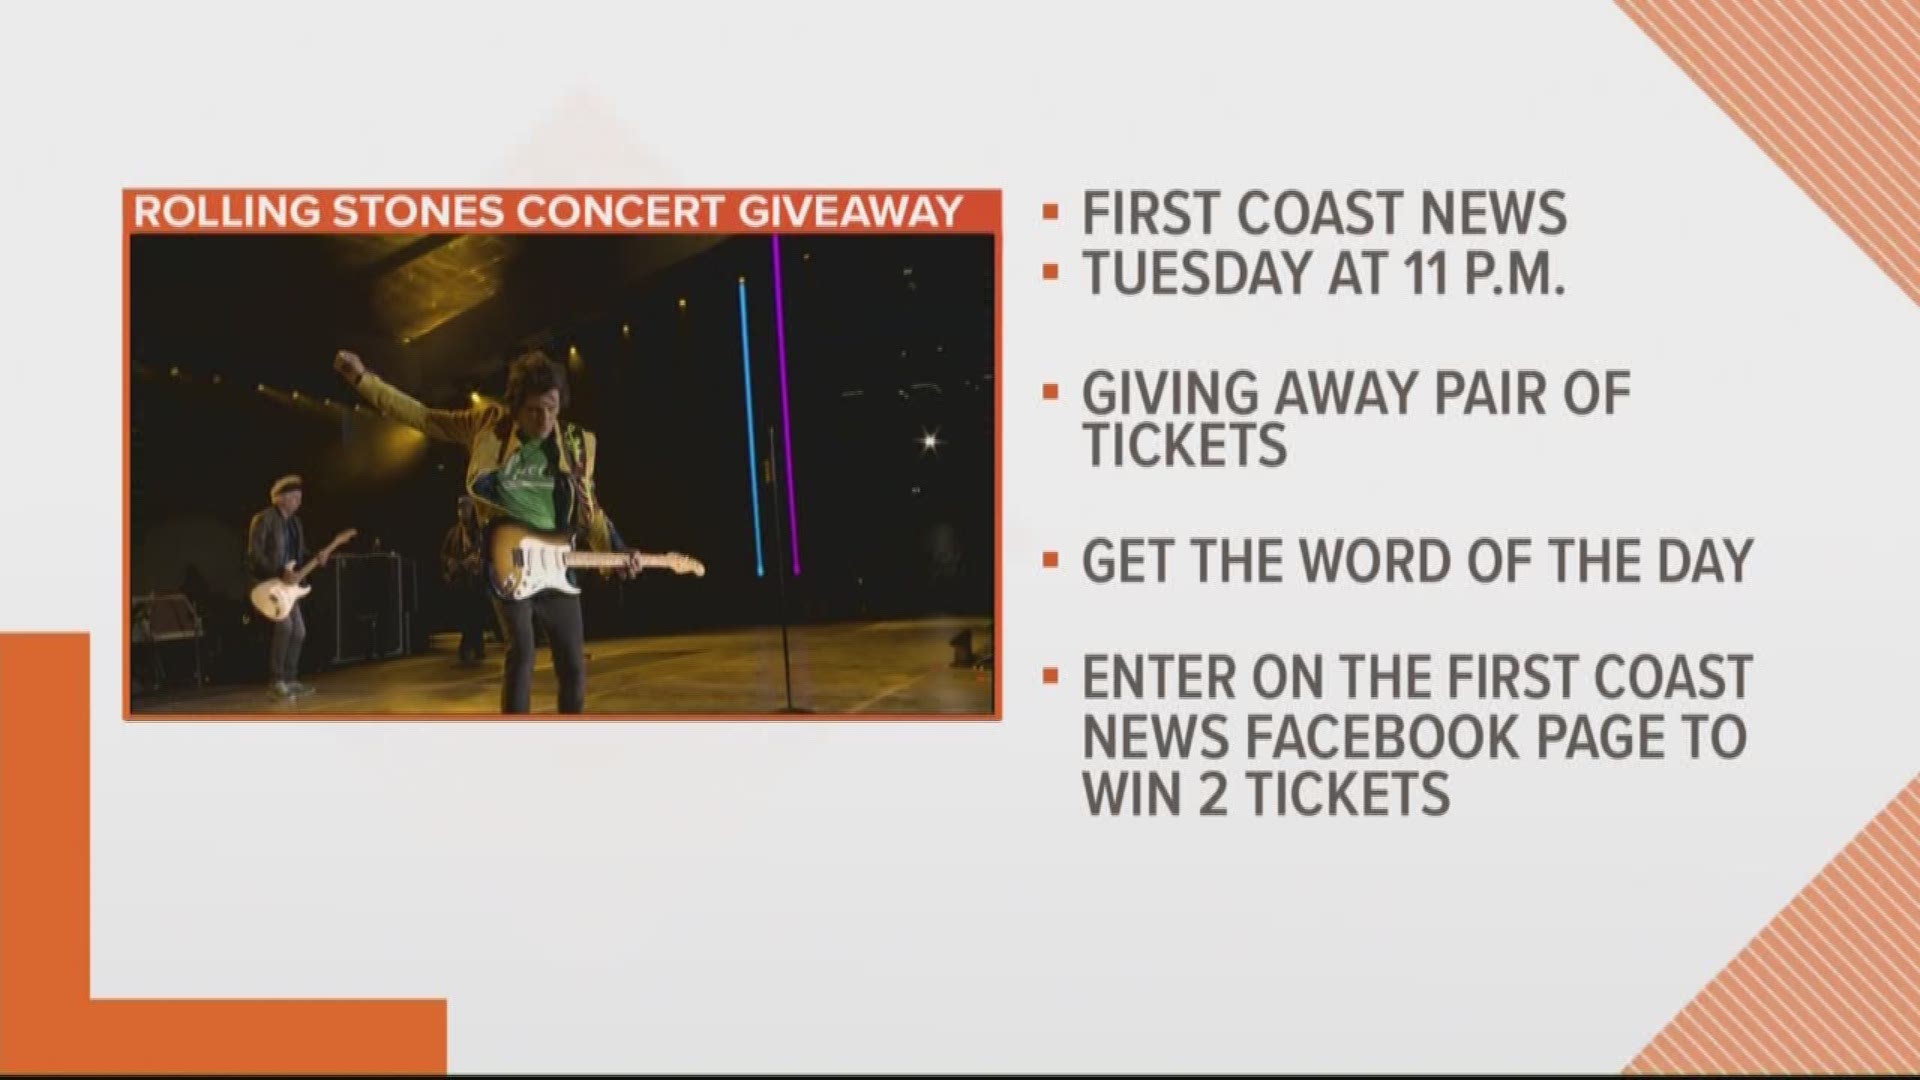 Tune into First Coast News at 11 on July 16 for a chance to win free tickets to the concert!